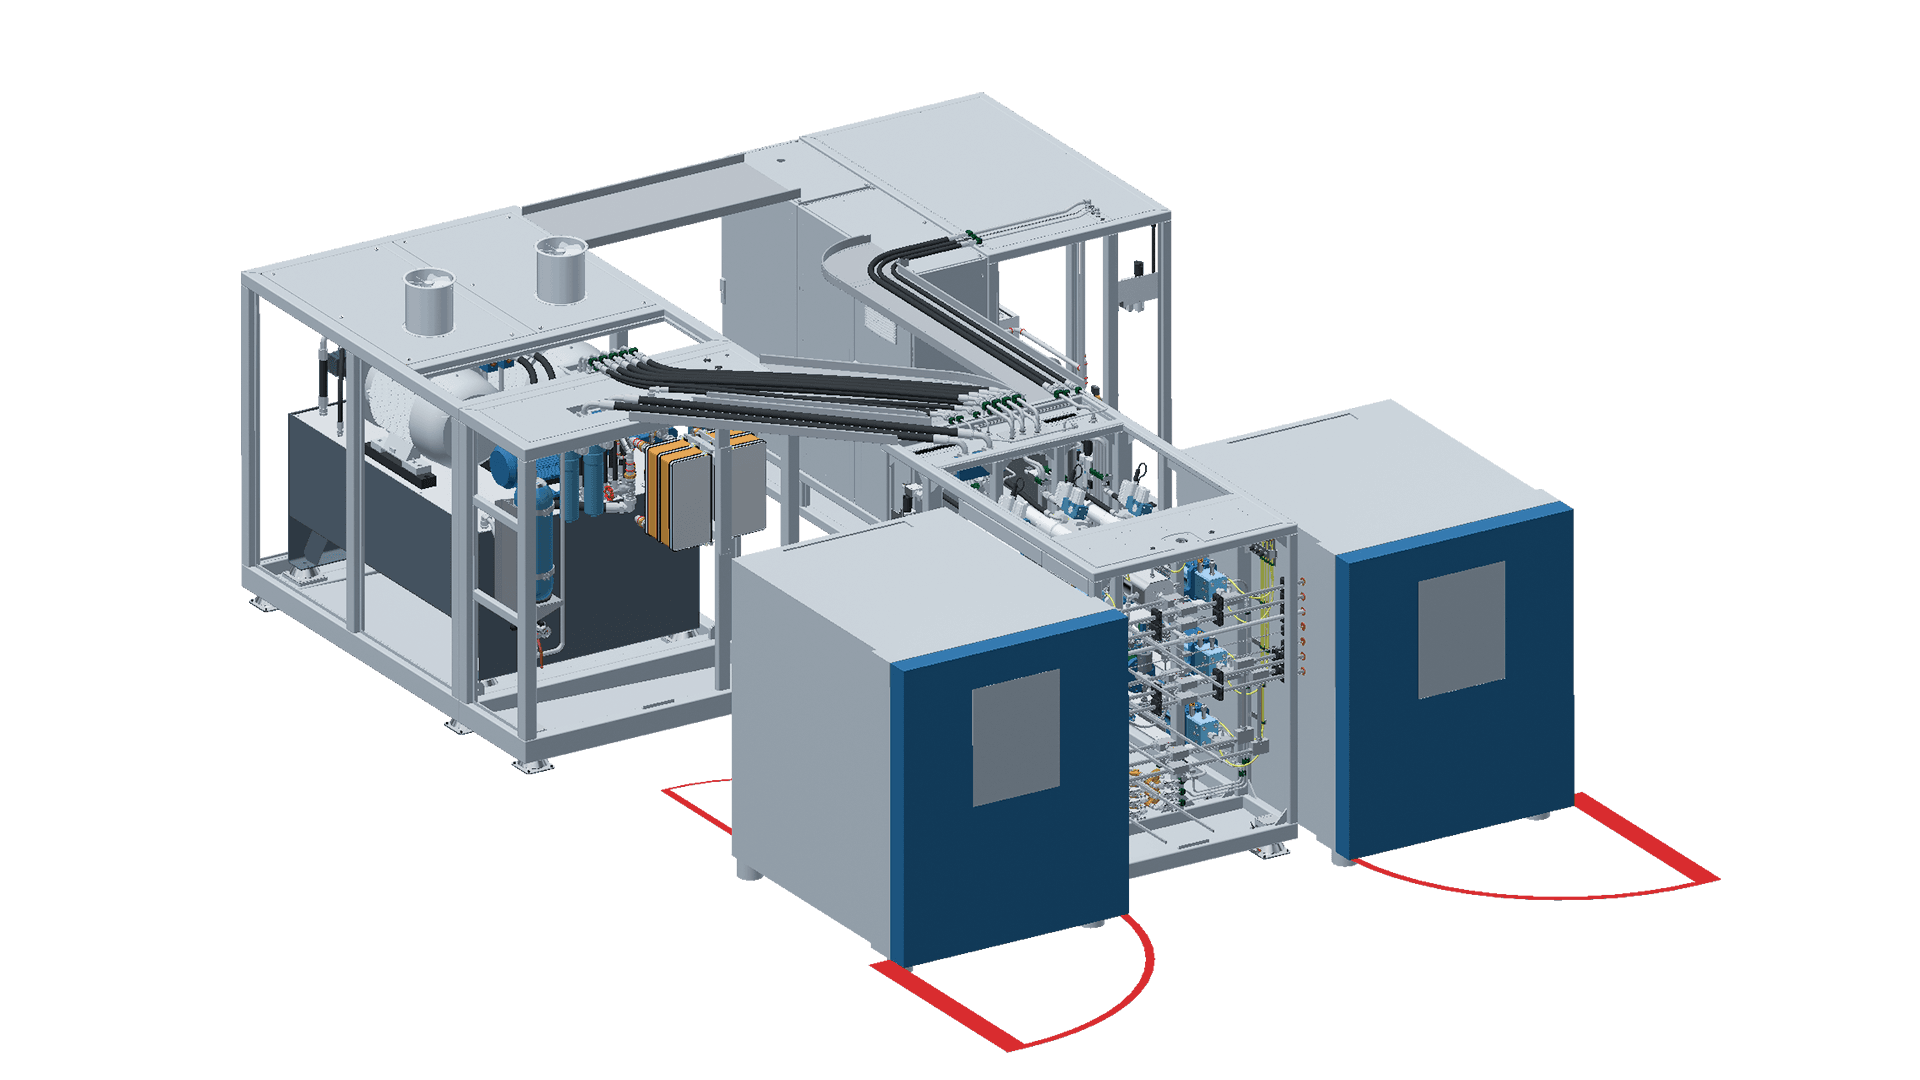 Custom design pressure cycle test rig with two climate chambers and seperate hydraulic unit by Poppe + Potthoff Maschinenbau